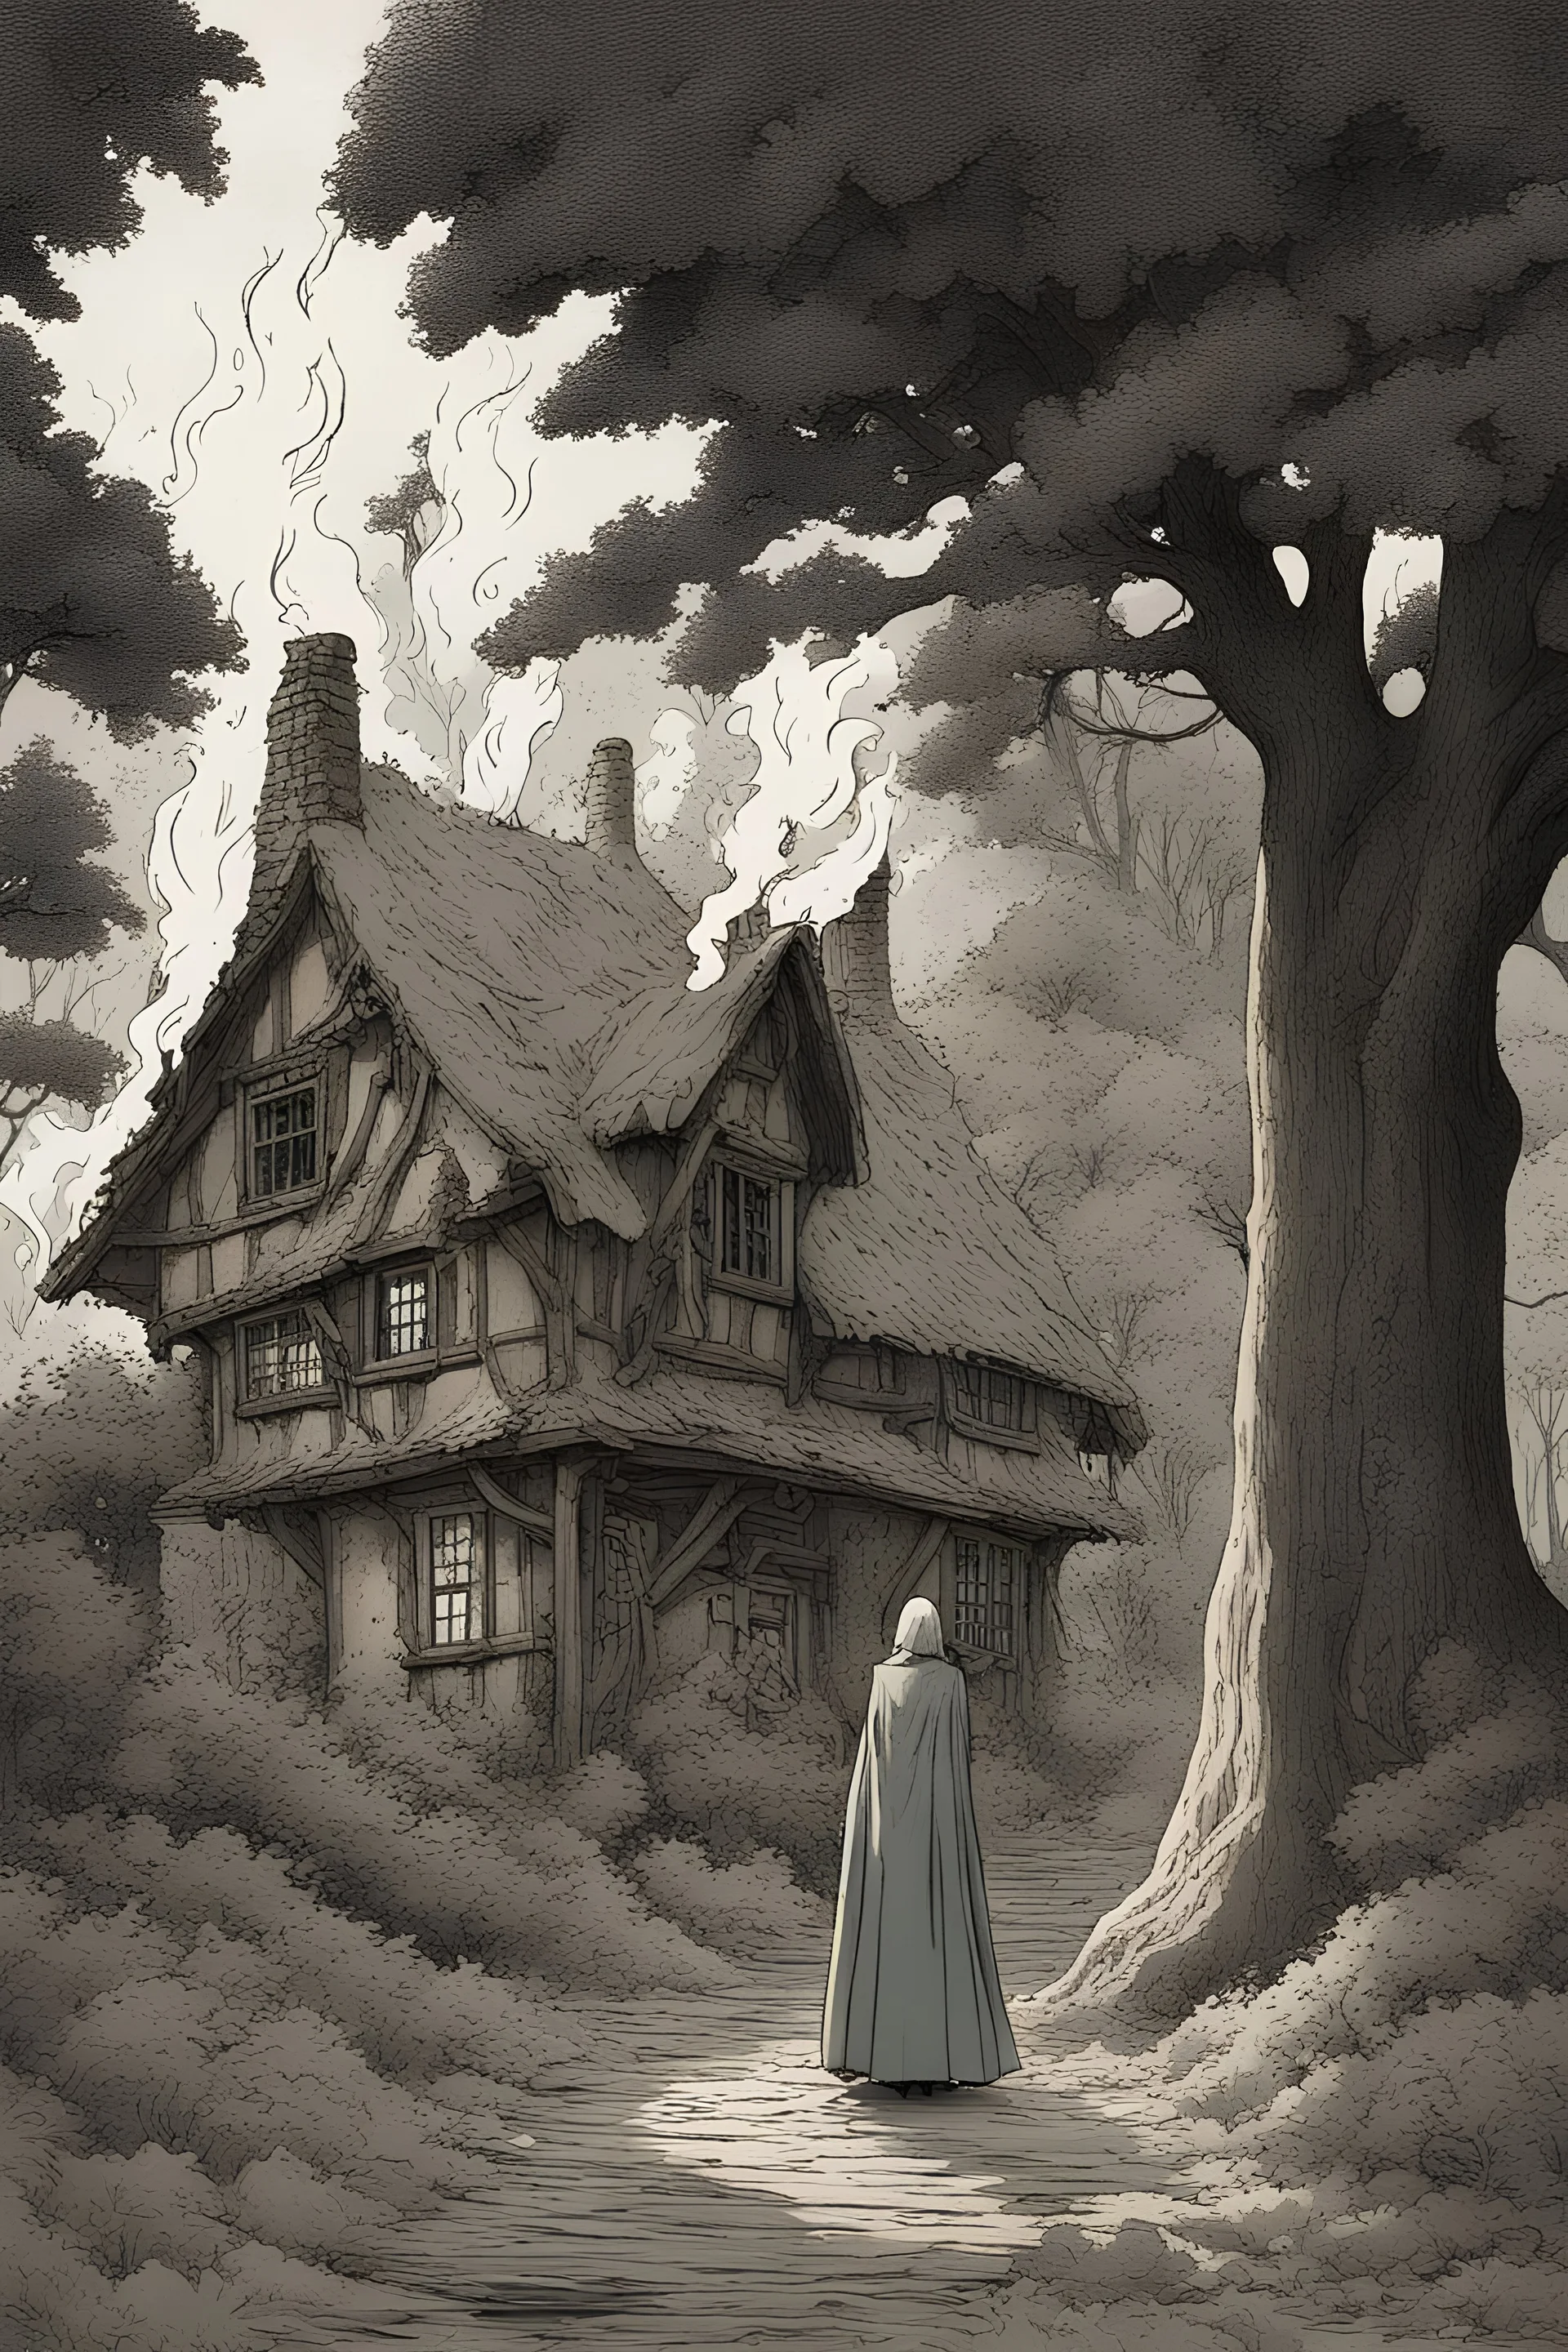 In the heart of a dense, ancient forest, a medieval cottage stands engulfed in flames, its timeworn timbers crackling and sending plumes of smoke into the sky. In the foreground, a mysterious woman in silhouette stands, the house is melting like candy. a woman in a cloak hides behind a tree.